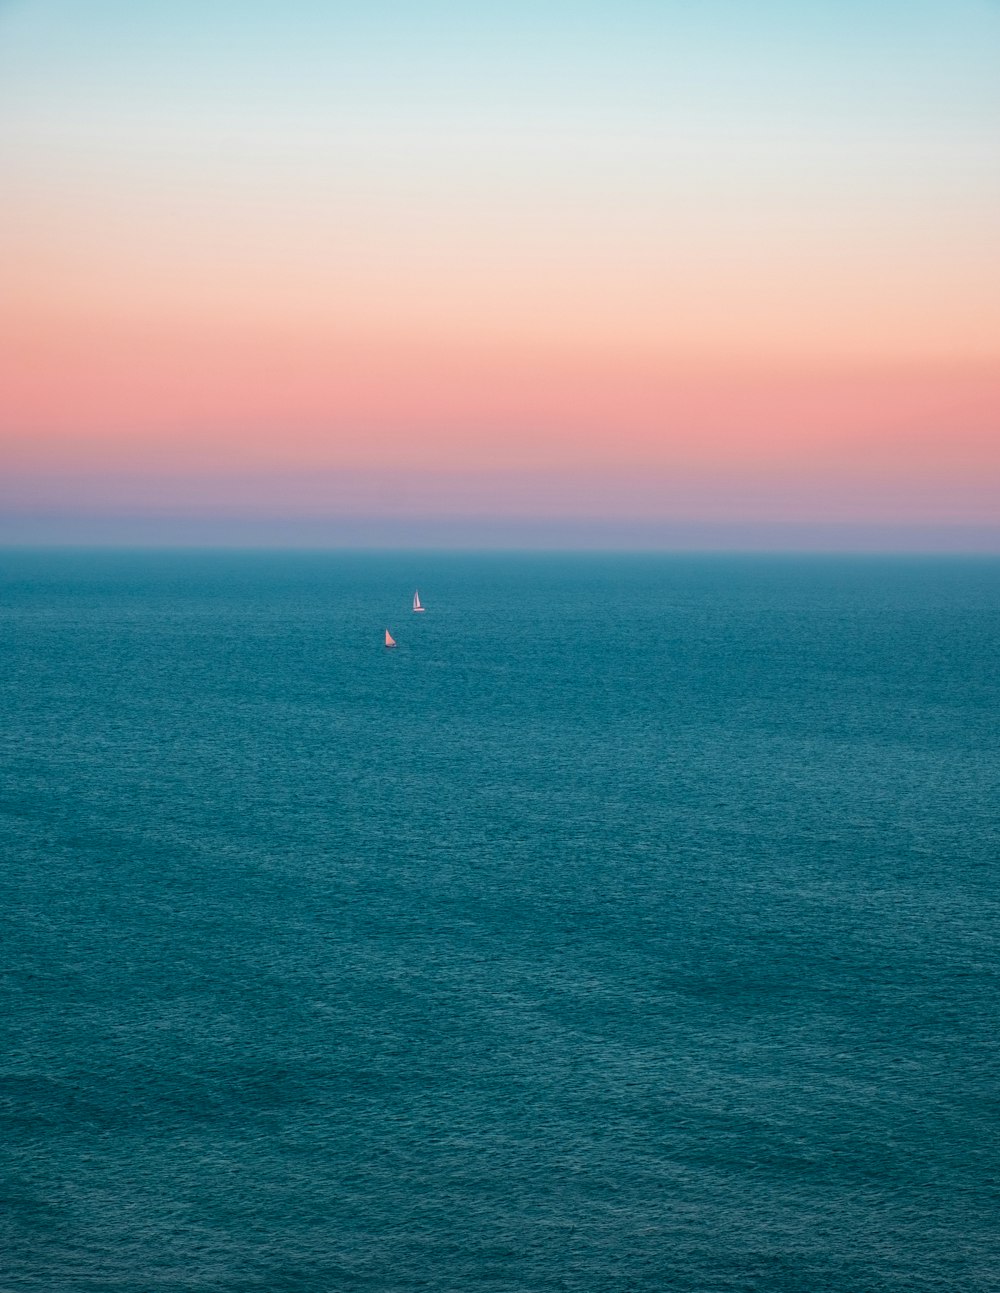 person in the middle of ocean during sunset